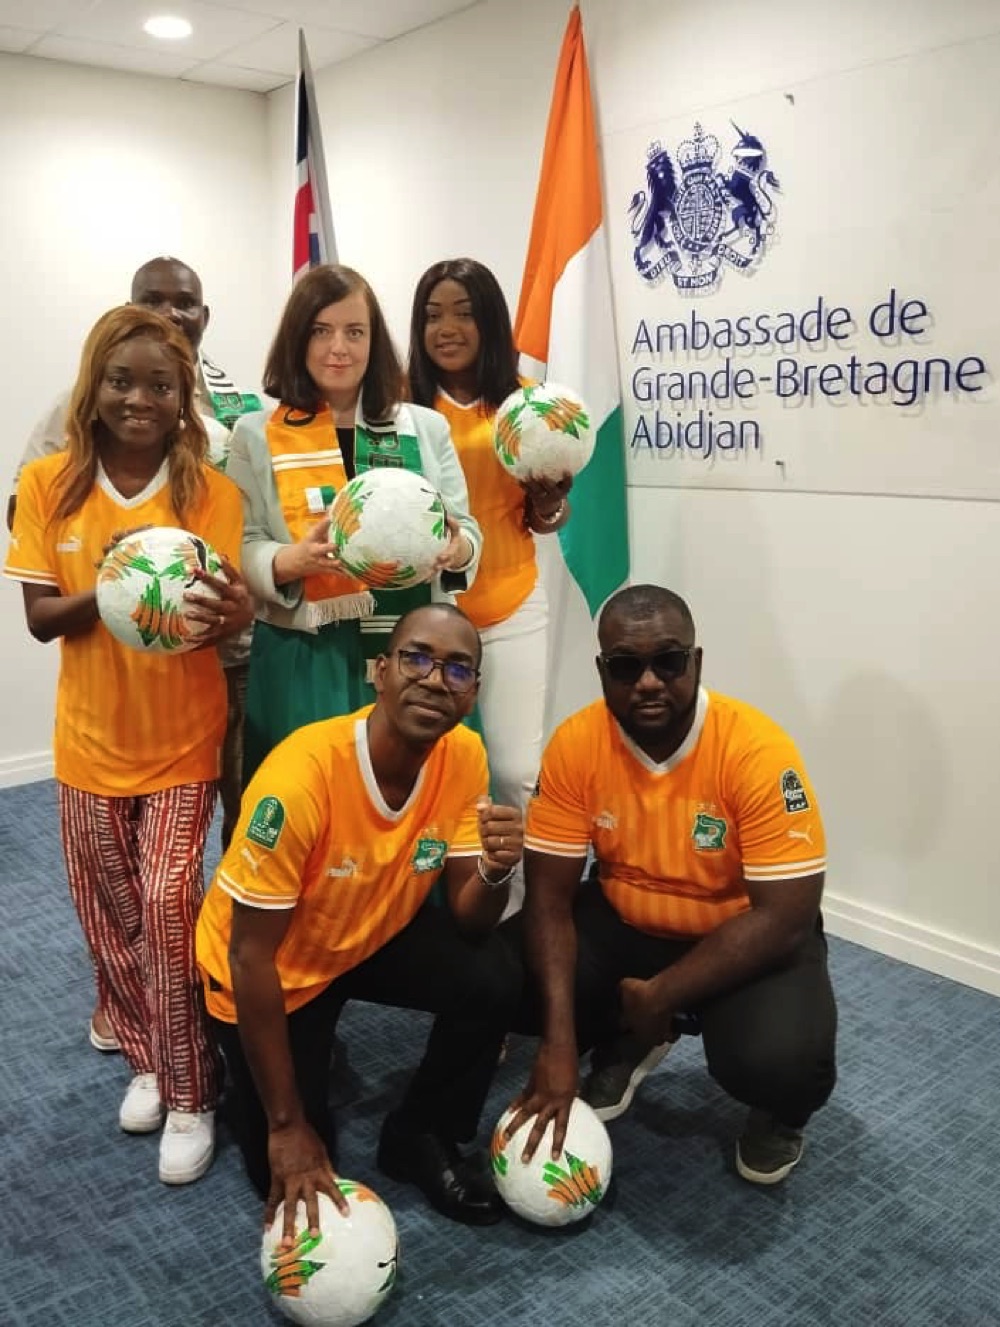 Ivory Coast/Soccer: United Kingdom expresses support for Ivory Coast to successfully host CAN 2023